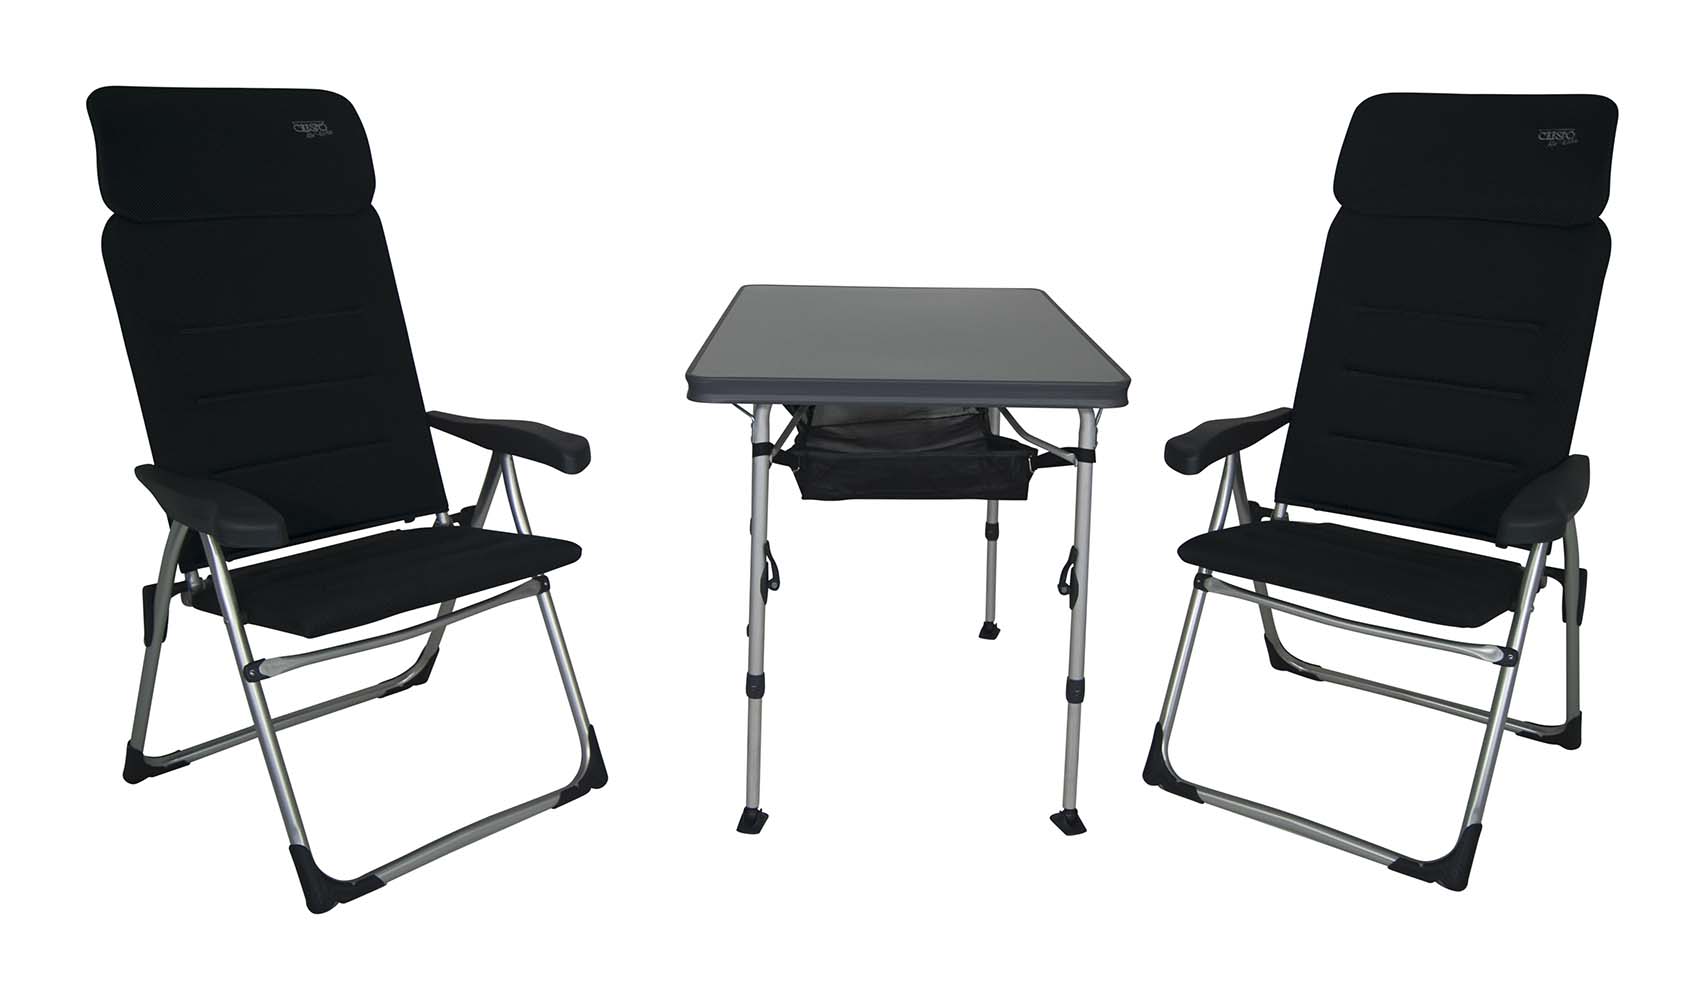 1104968 A set consisting of 2 AA-213 Air-Elite Compact chairs, a table AL-246 with storage net, and a storage case. A very compact and ideal set for 2 people. The set is easy to carry in a very compact manner, including a storage case. In total, the set is foldable to a thickness of only 18 cm.